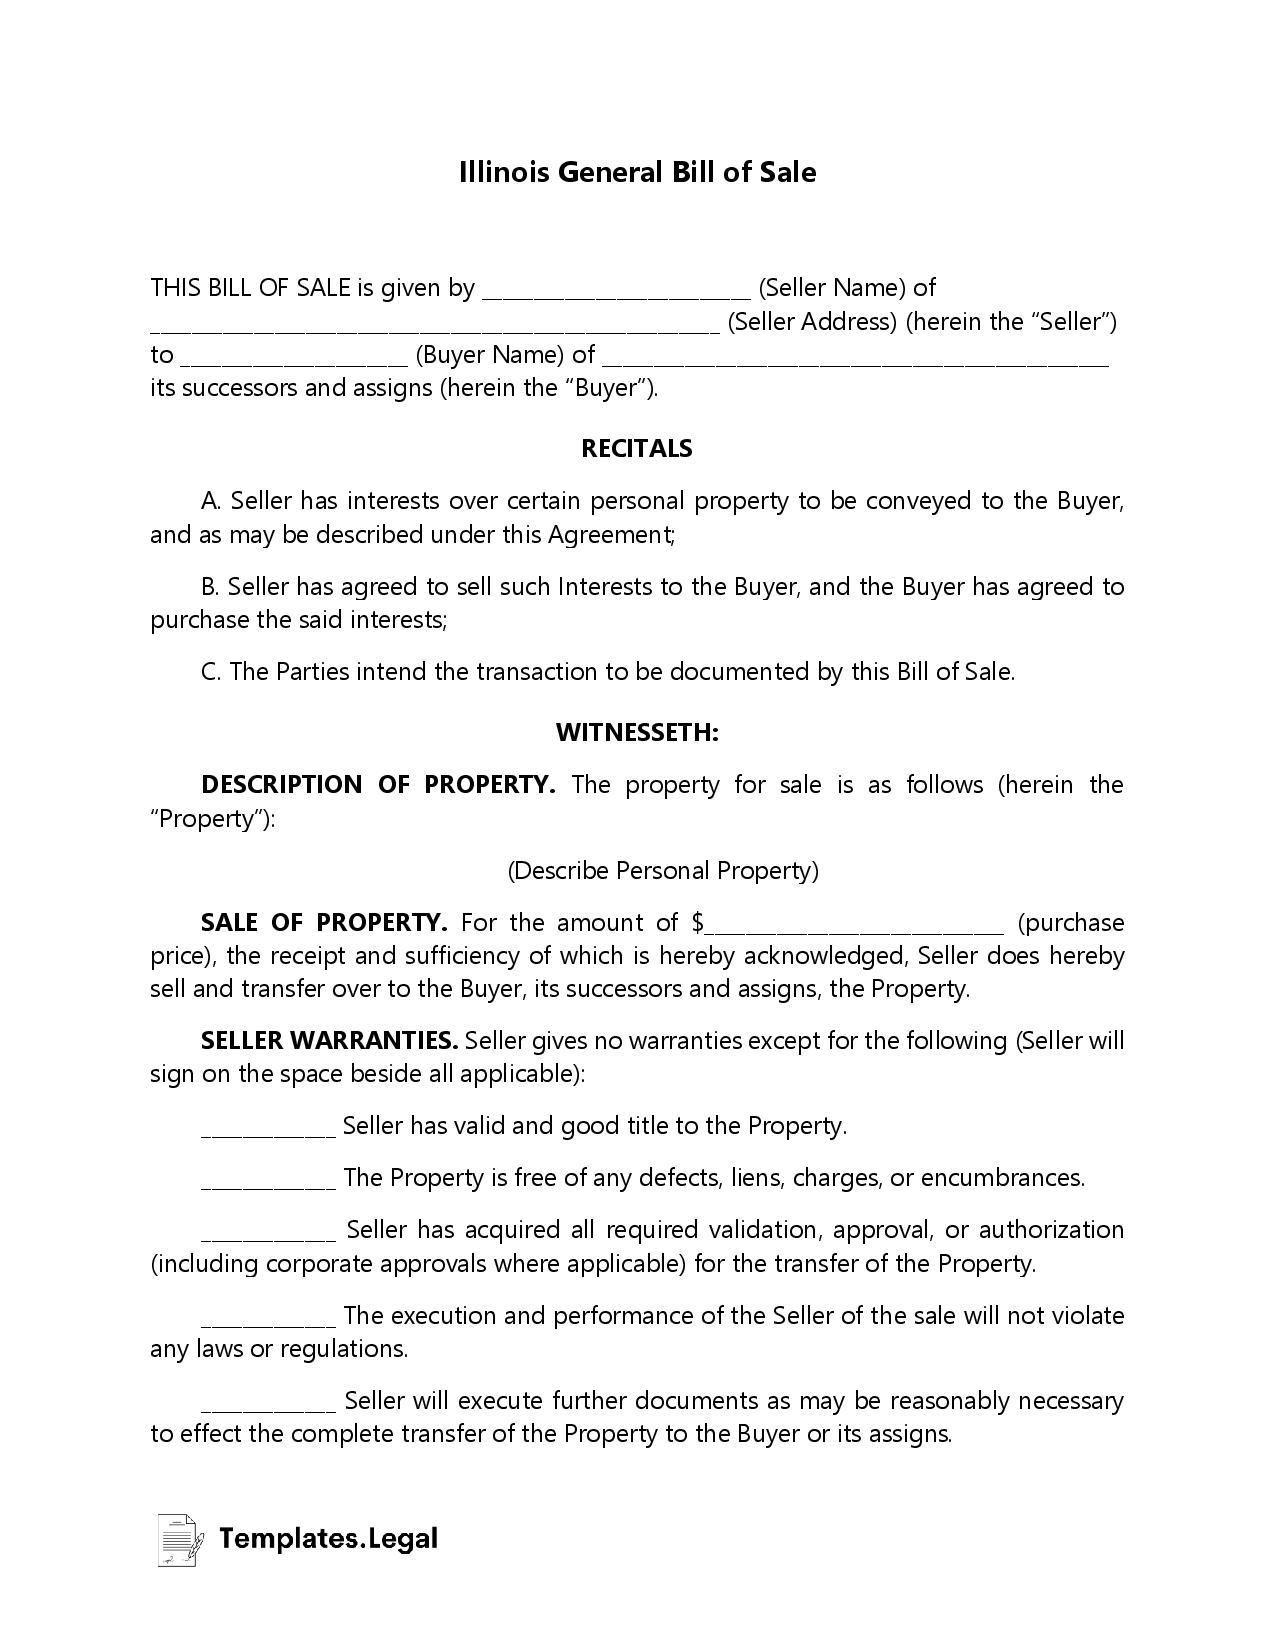 Illinois General Bill of Sale - Templates.Legal